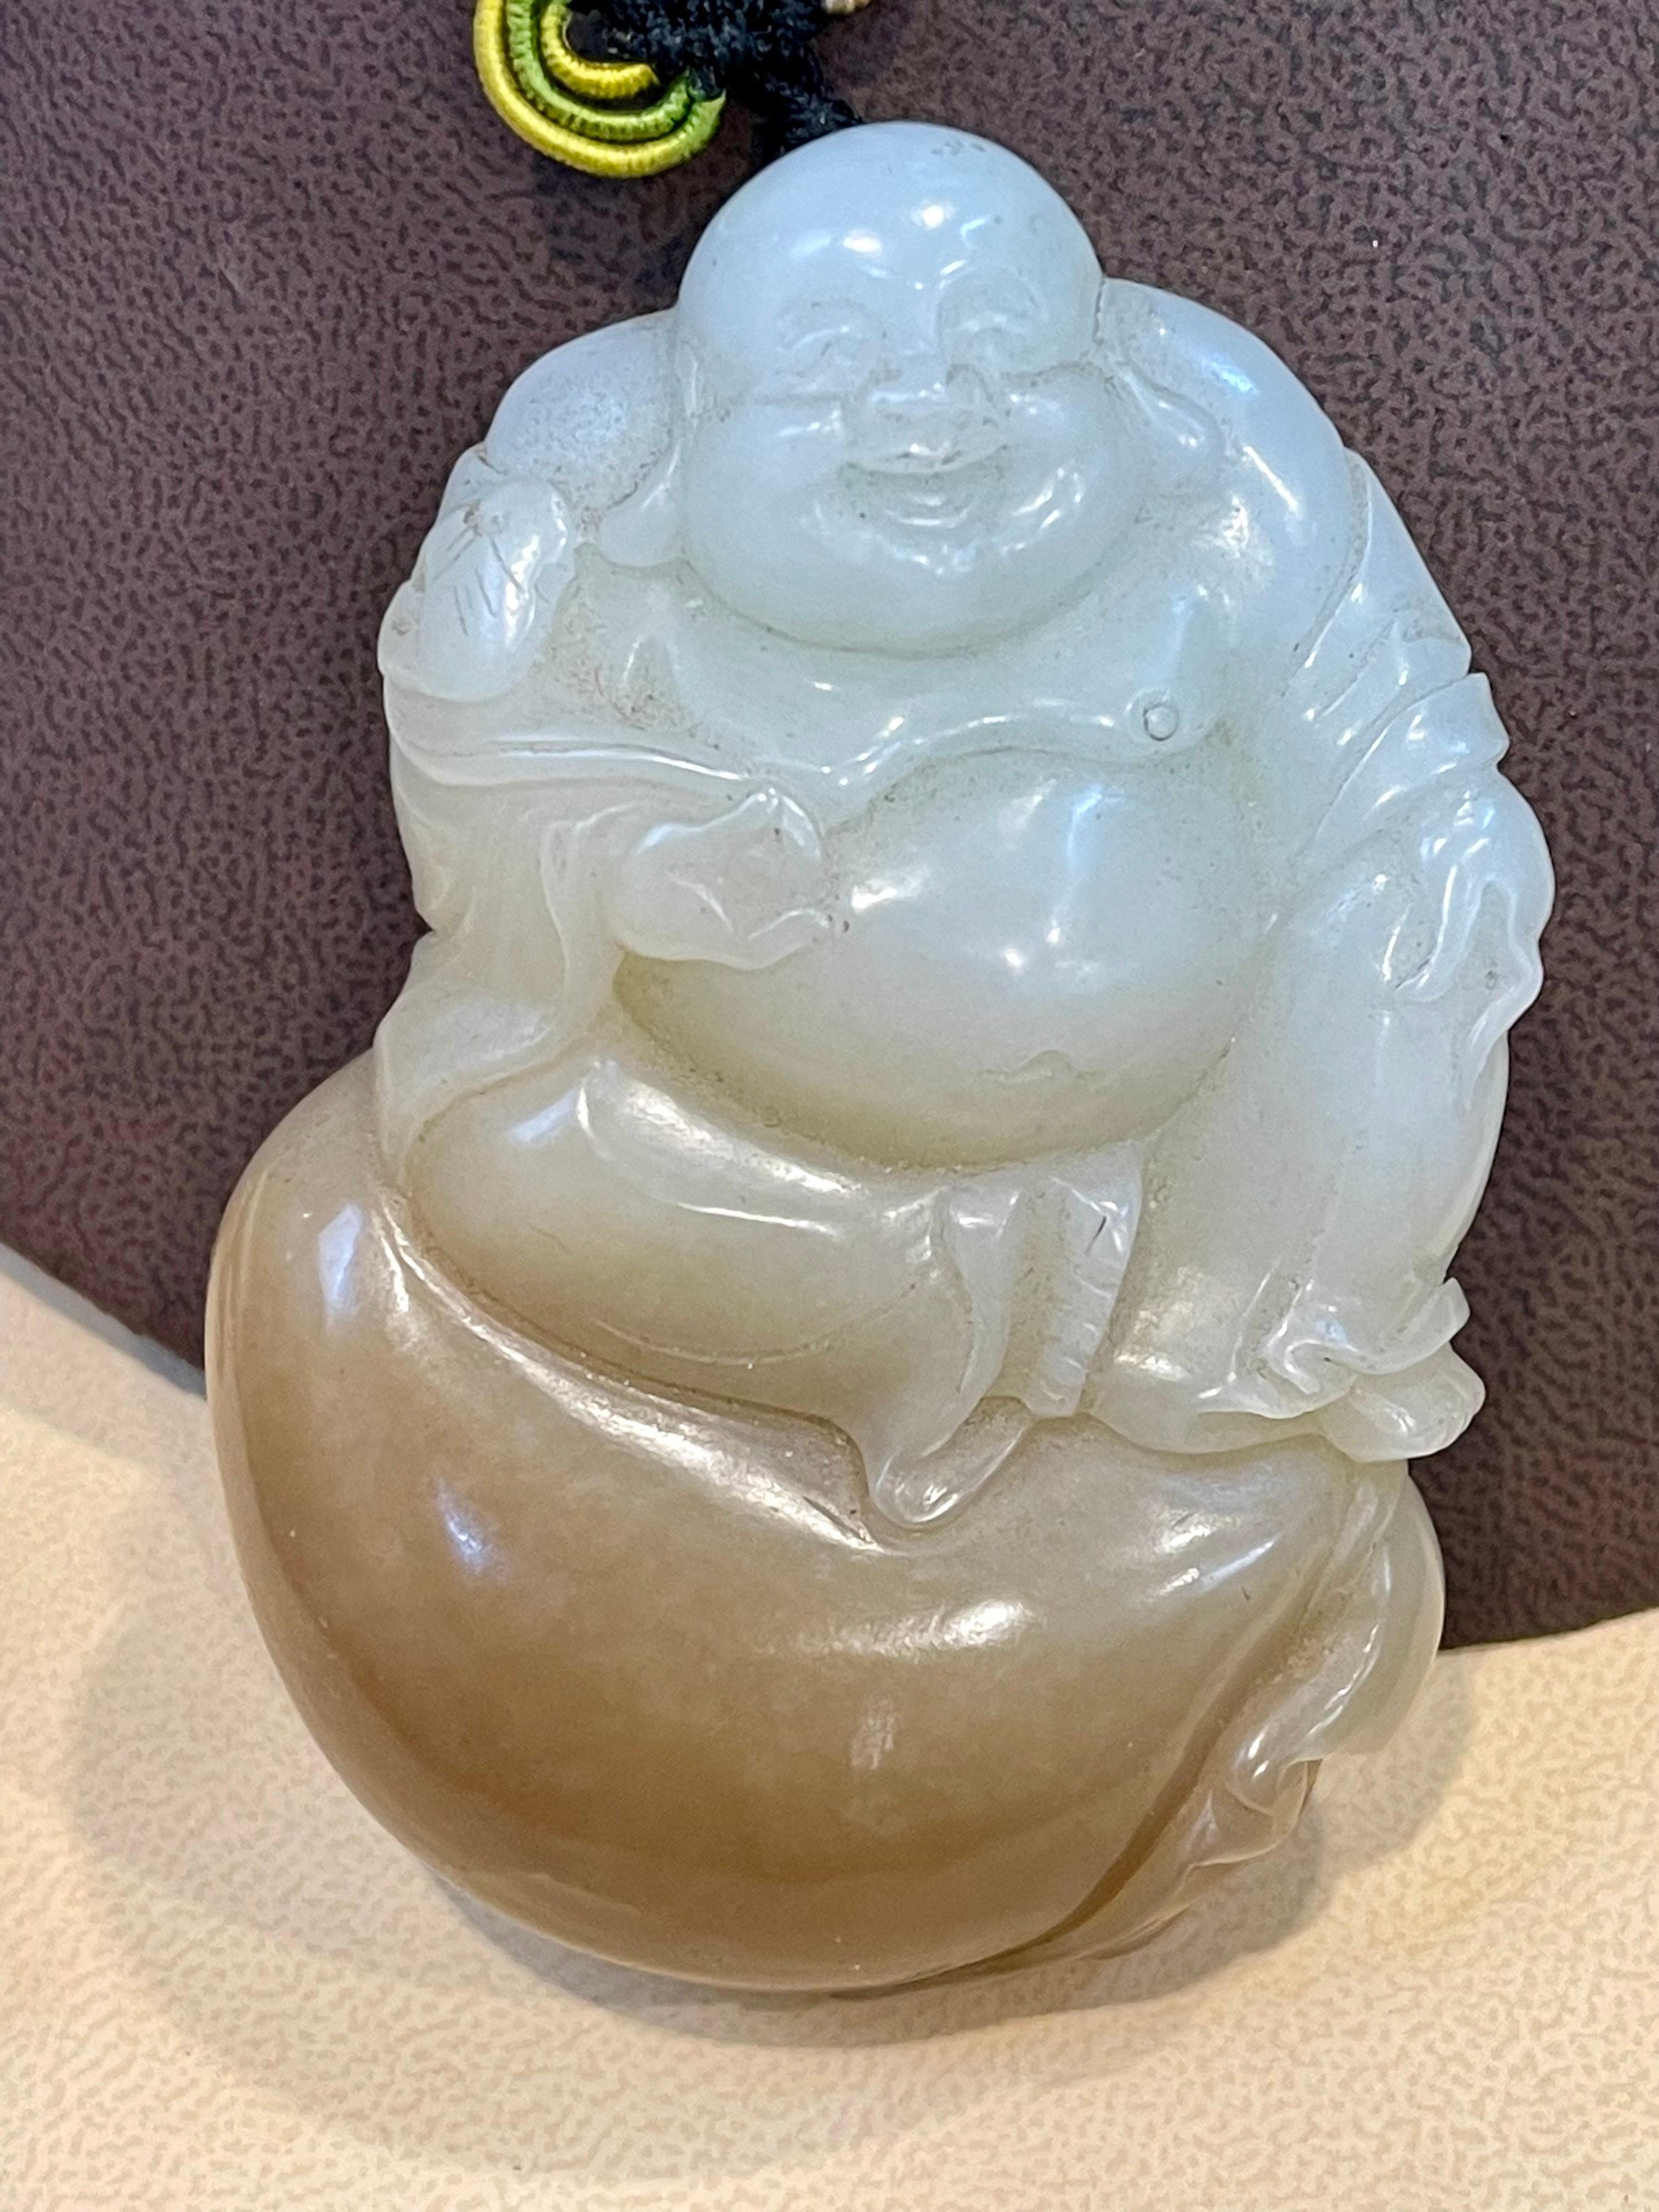 Certified Vintage 1950s Carved Jade Laughing Buddha Large Pendant Jade Necklace/ Hanging / Decor
It is supposed to be very lucky for the household people
It is certified and certificate is attached 
VINTAGE
PRE-OWNED 
ESTATE PIECE from 1950.s